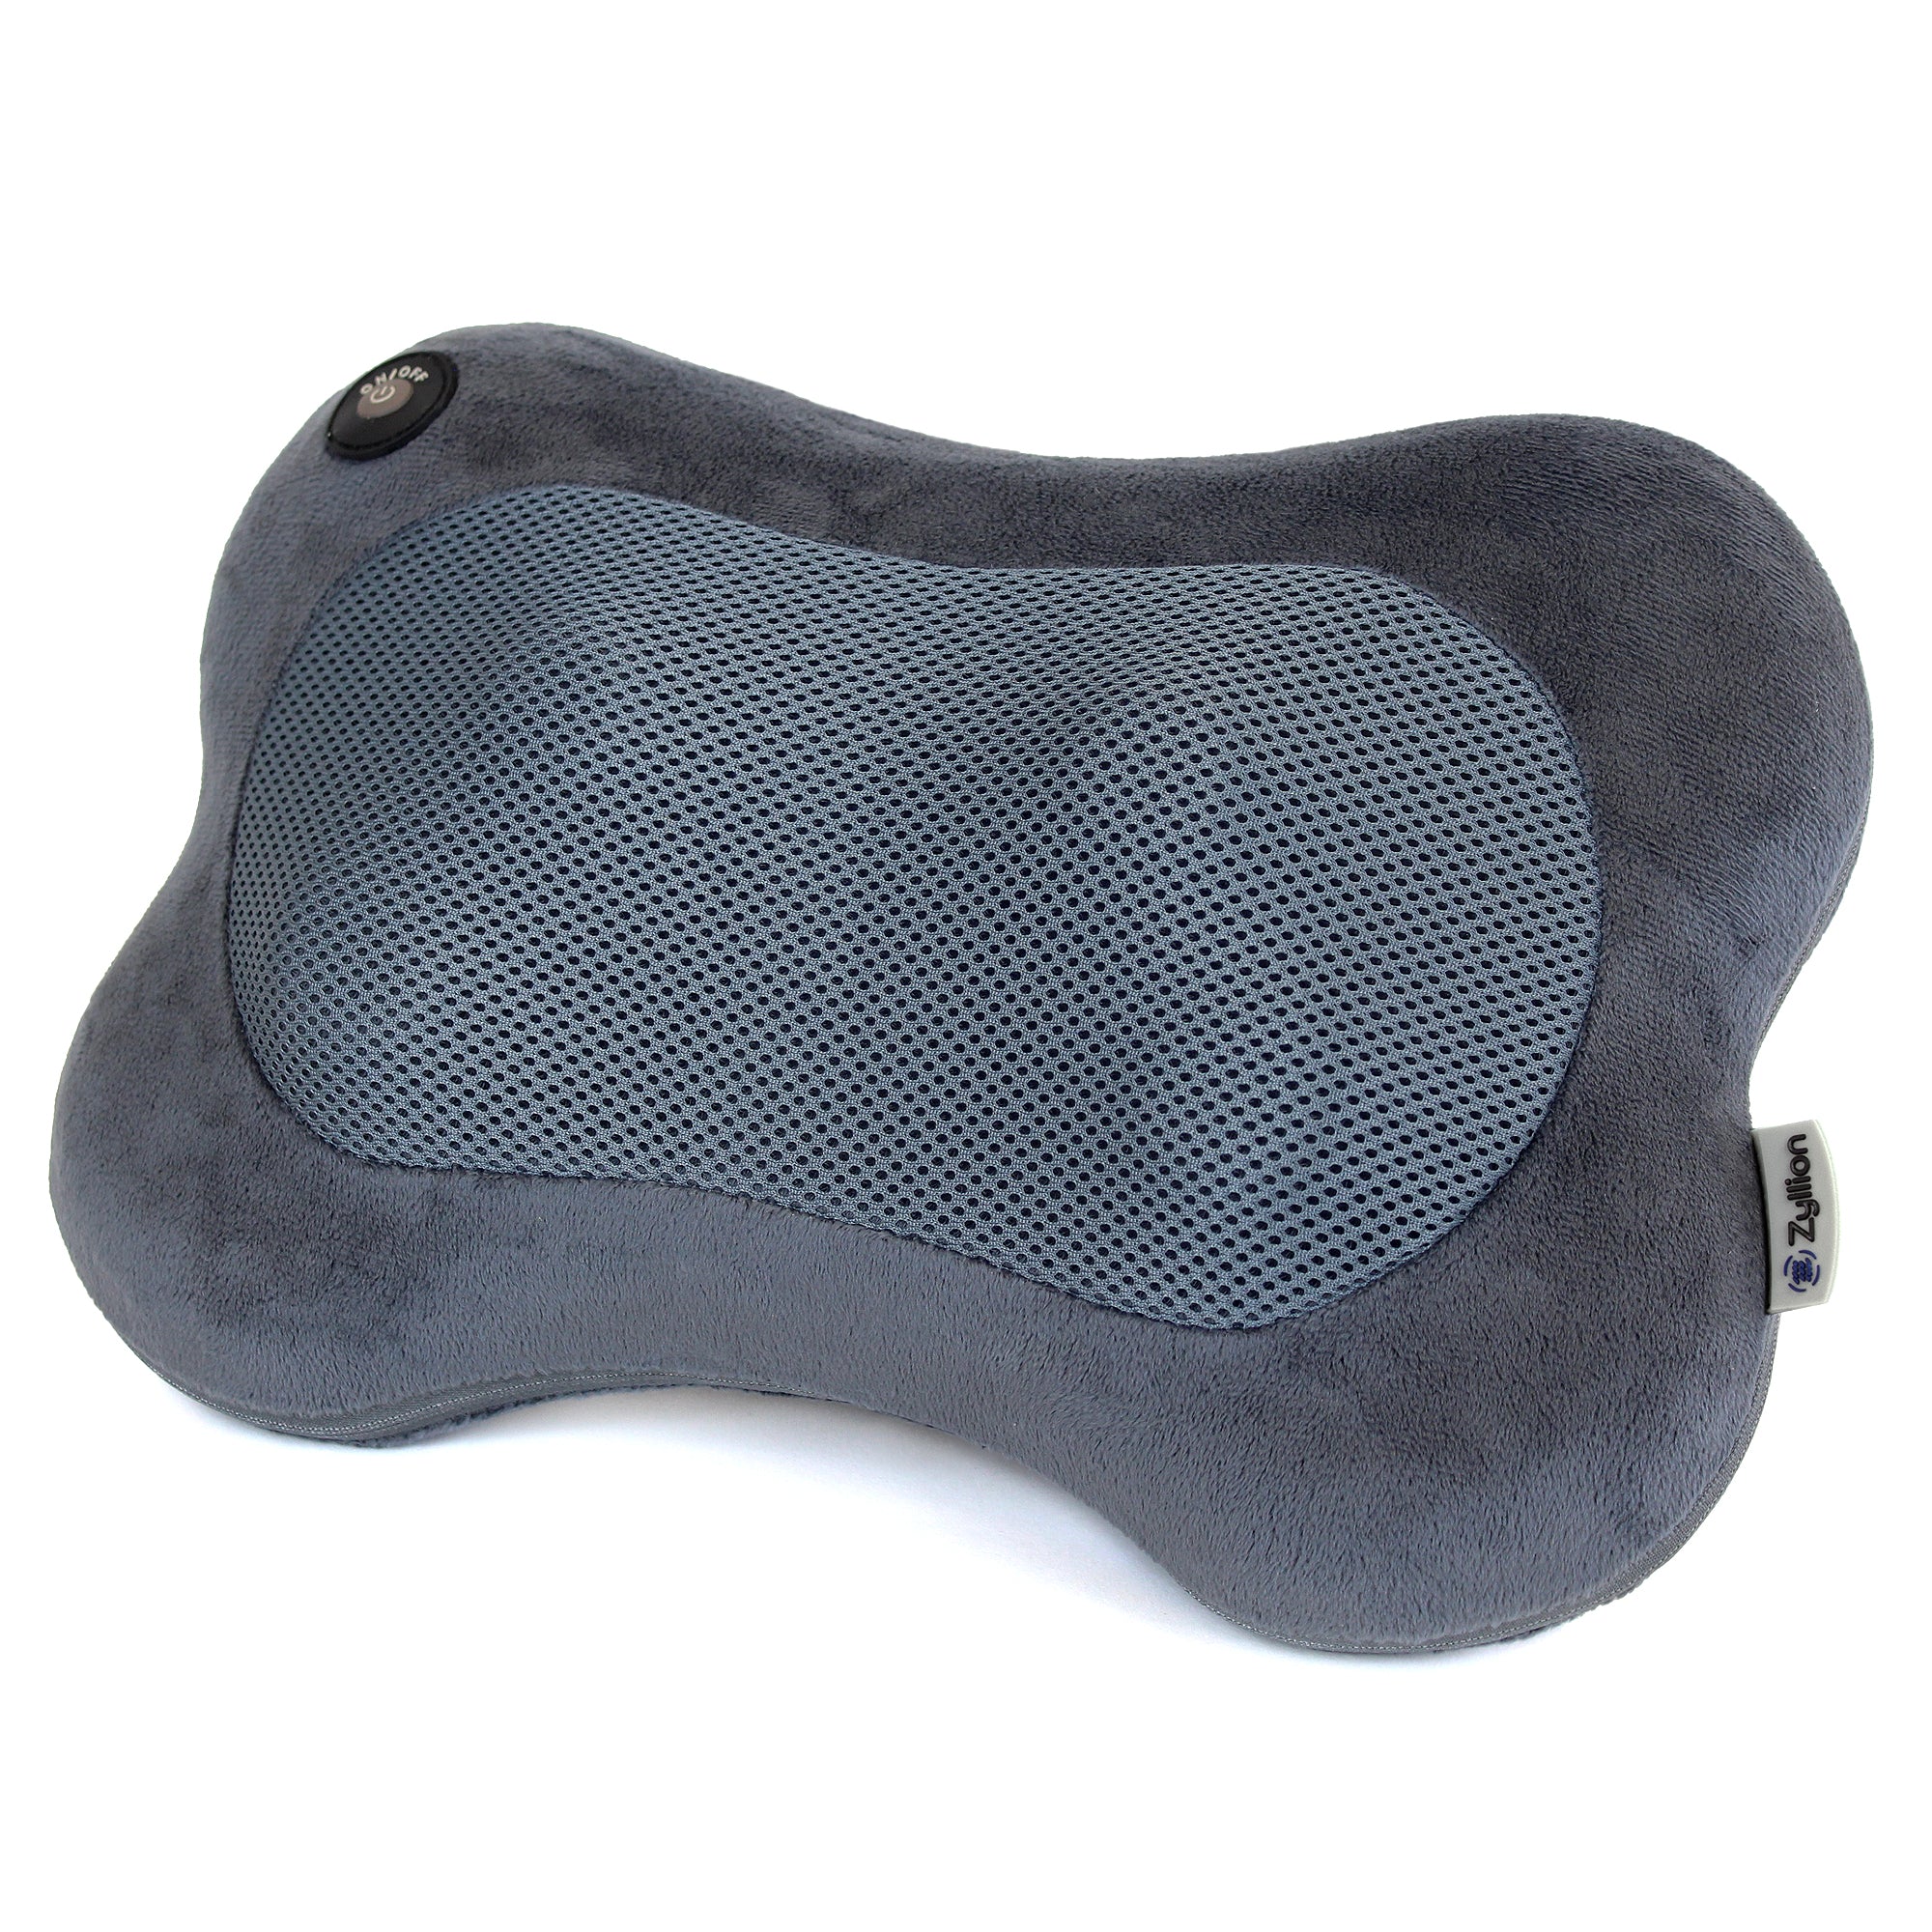 Zyllion ZMA-14-BKAVE Shiatsu Neck & Back Massager Cushion With Soothing  Heat for sale online